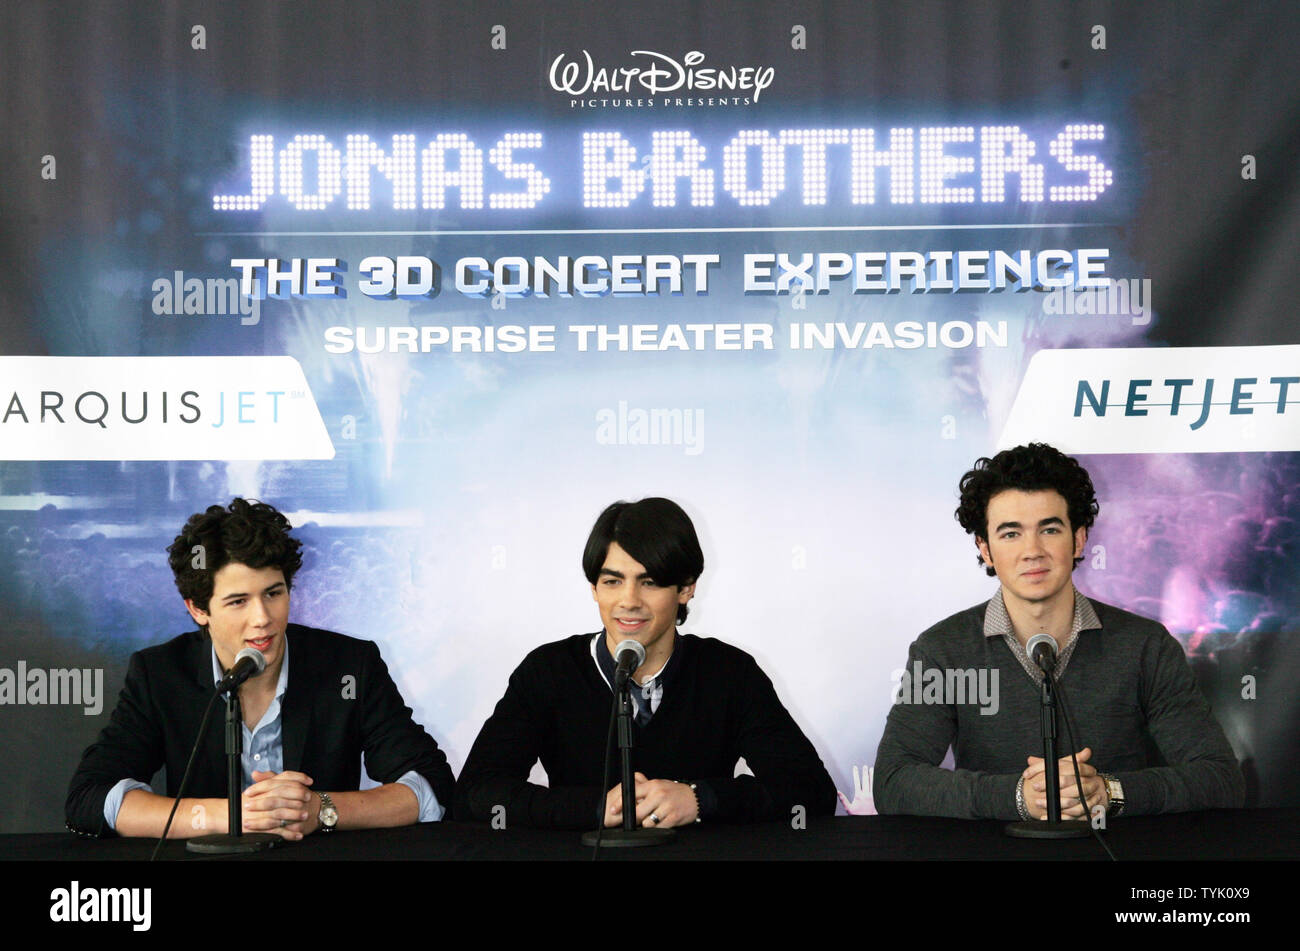 The Jonas Brothers (L-R) Nick, Joe and Kevin attend a press conference about embarking on their 'Surprise Theater Invasion' at the Westchester Airport in New York on February 28, 2009.  (UPI Photo/Laura Cavanaugh) Stock Photo